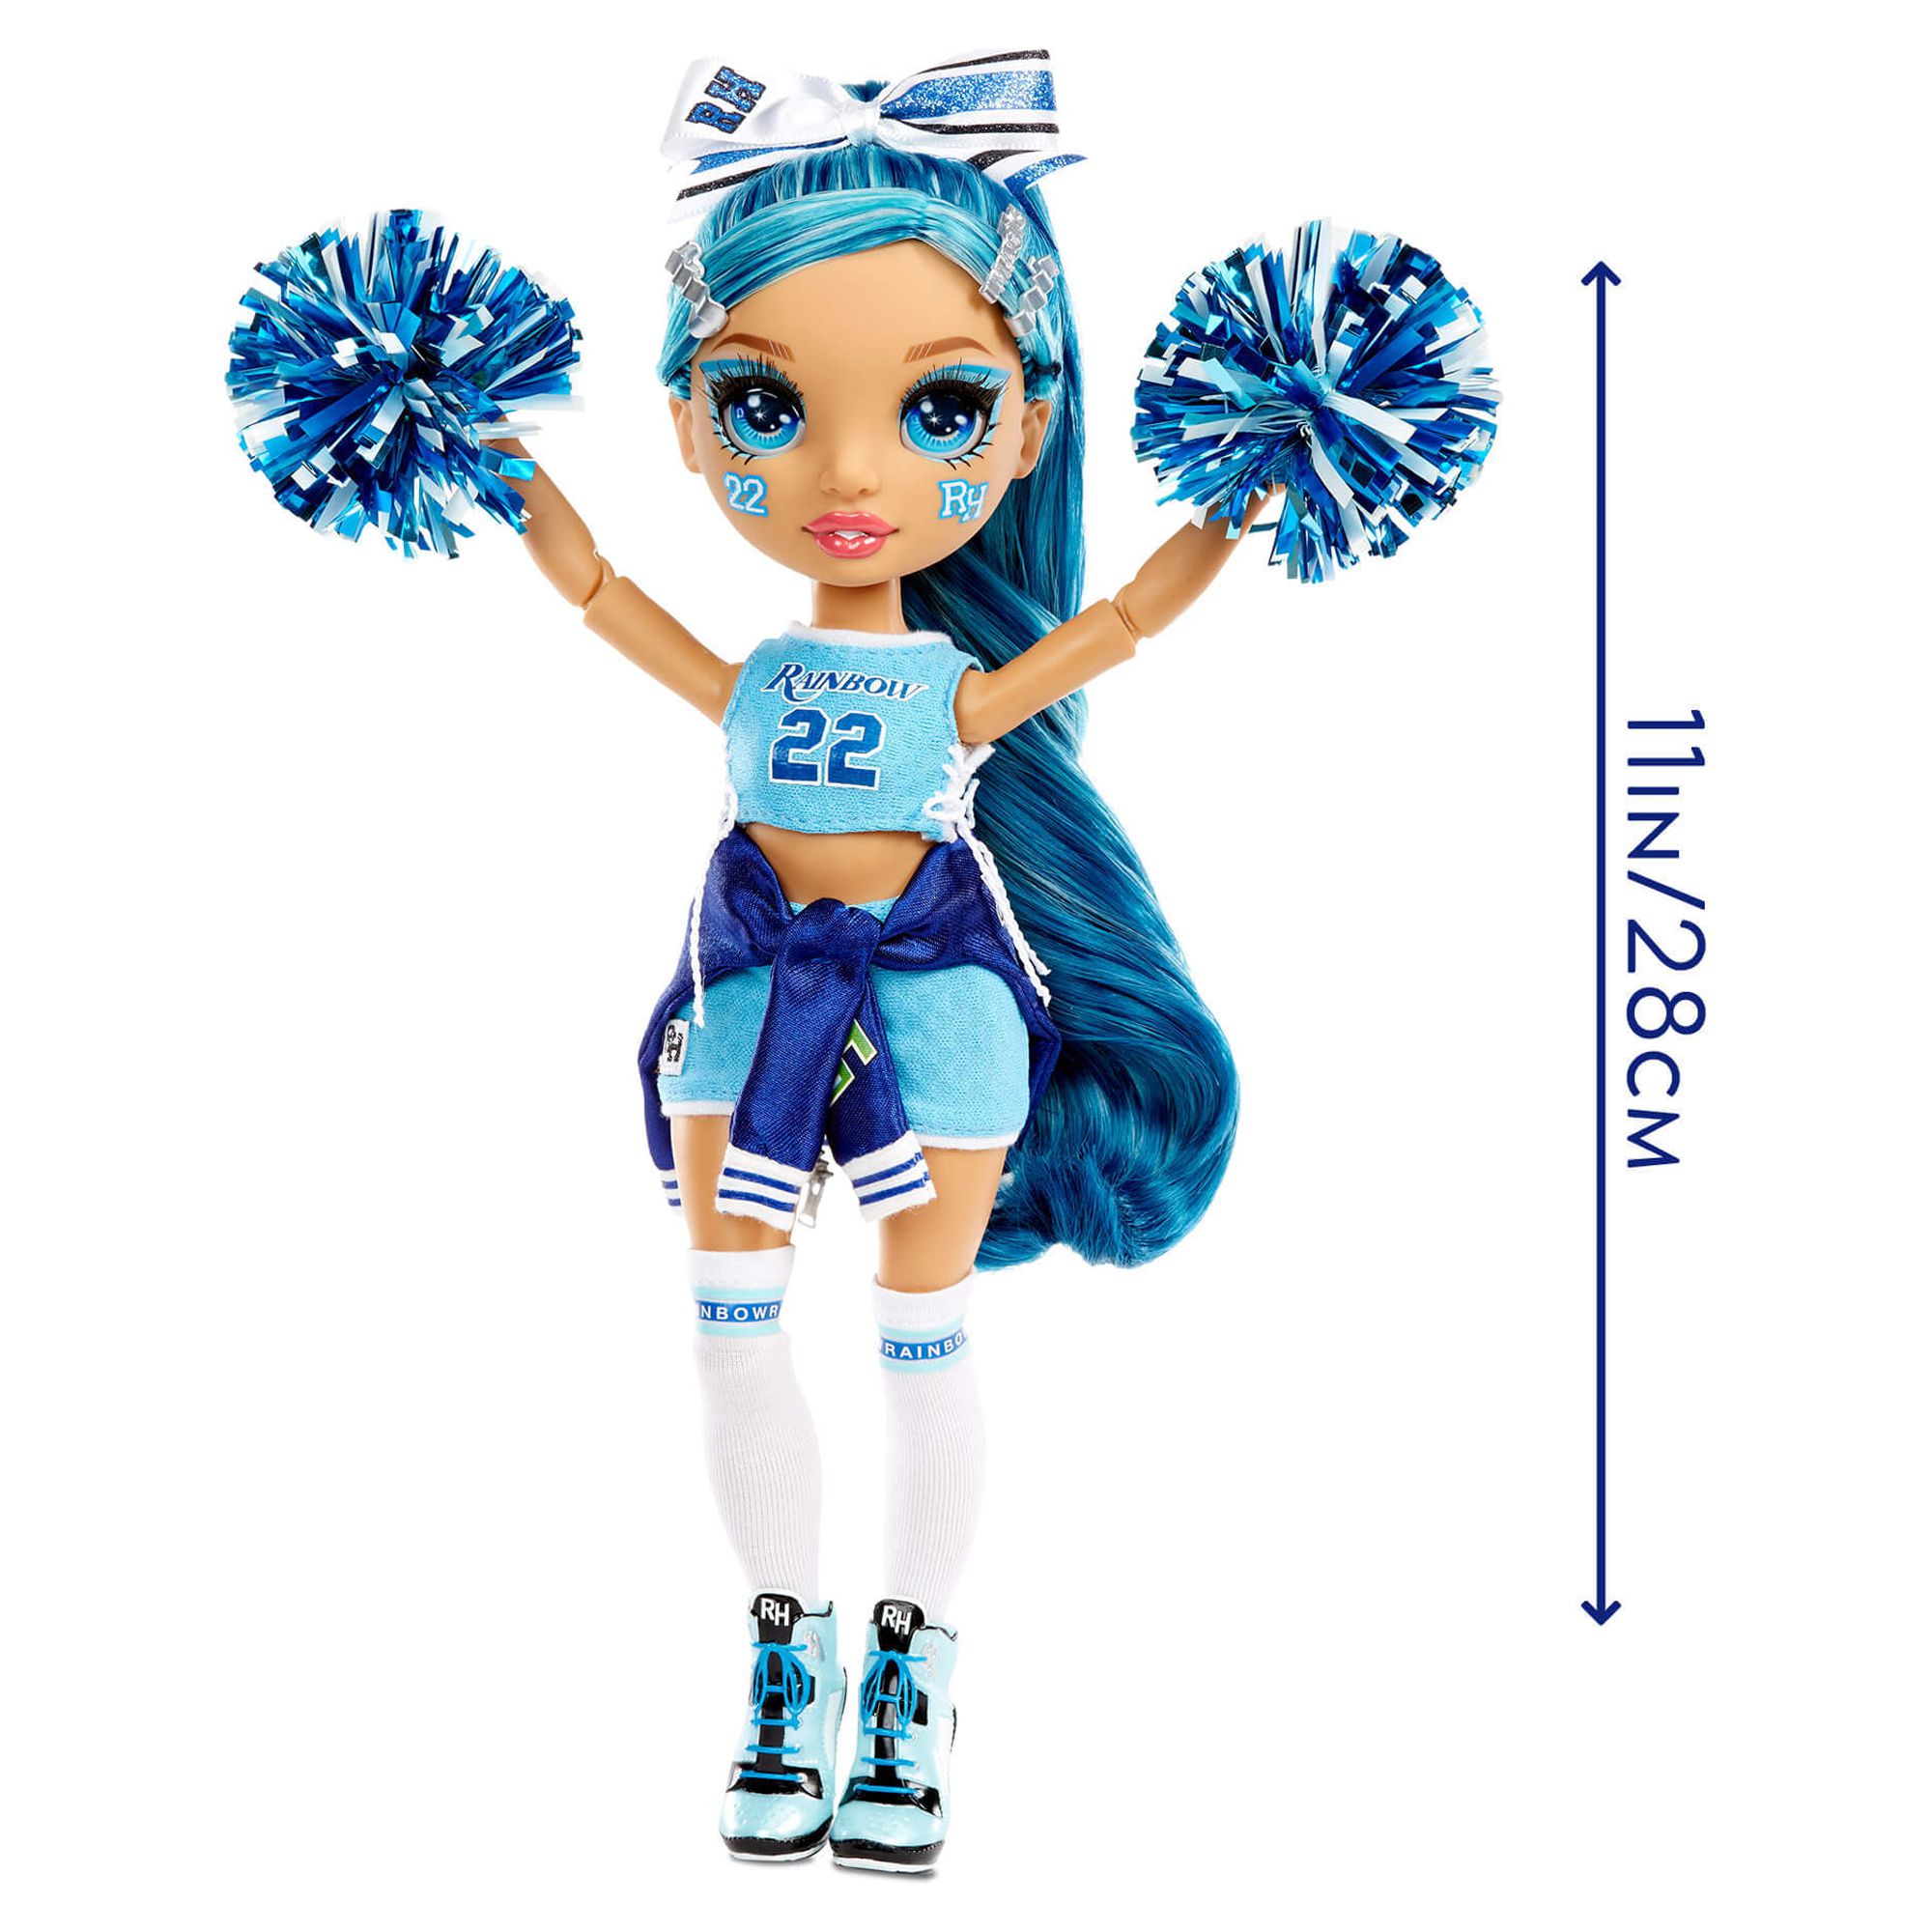 Rainbow High Cheer Skyler Bradshaw – Blue Fashion Doll with Pom Poms, Cheerleader Doll, Toys for Kids 6-12 Years Old - image 5 of 8